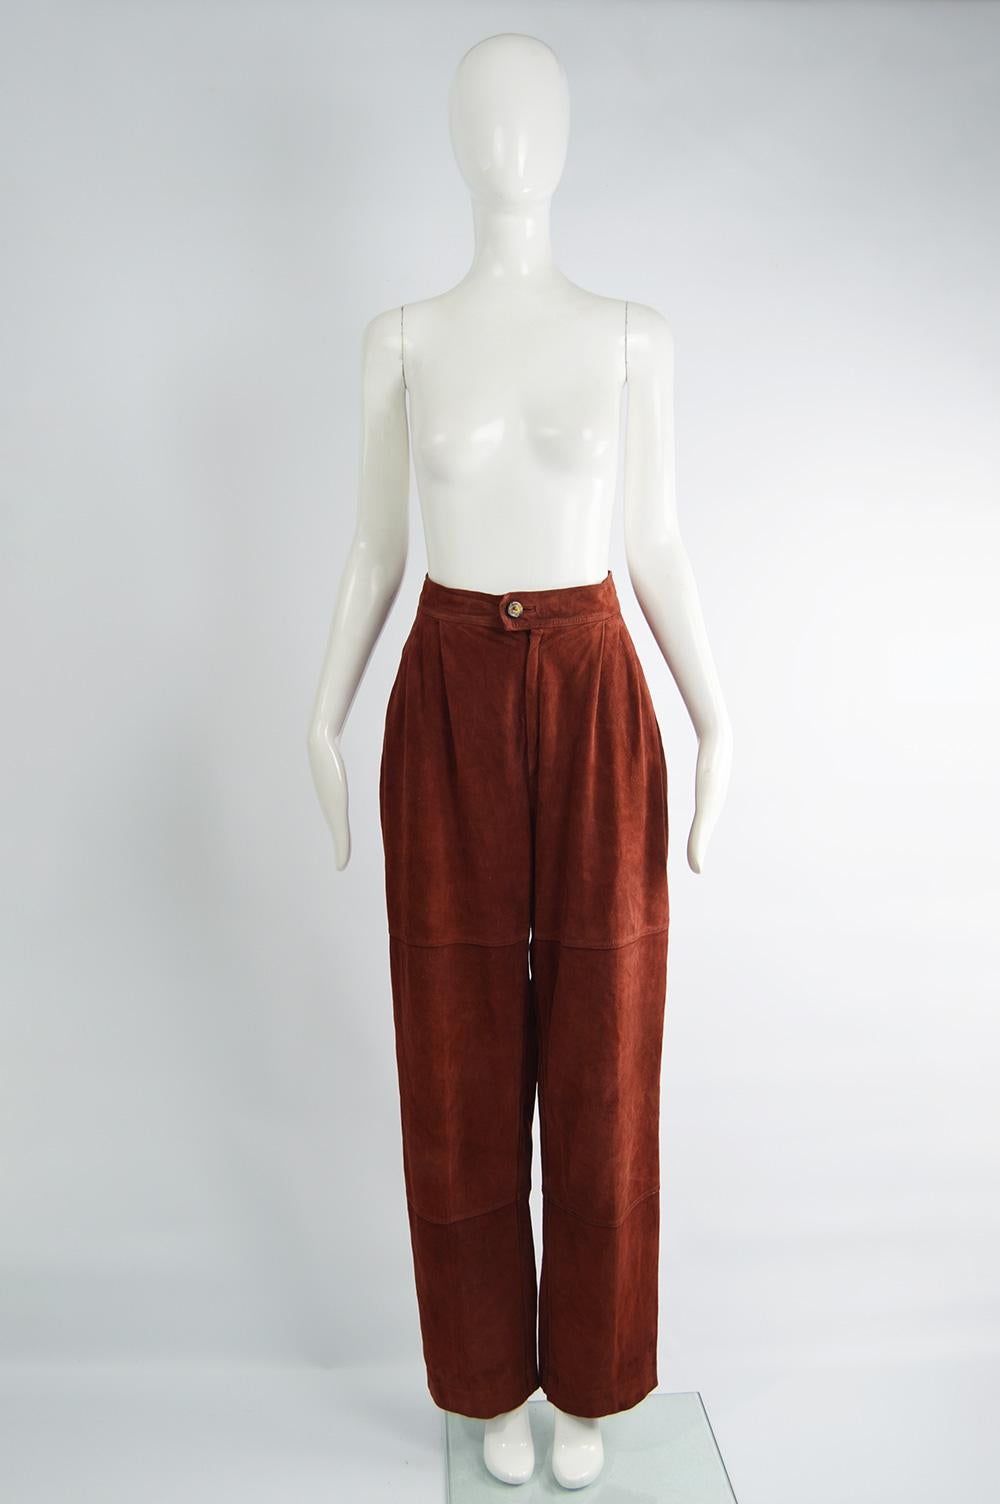 A fabulous vintage pair of Loewe pants from the late 70s / early 80s. In a buttery soft chamois suede with a flattering high waist and wide leg. The button fastening ar the front is engraved with the Loewe logo. 

Size: Not indicated; fits like a